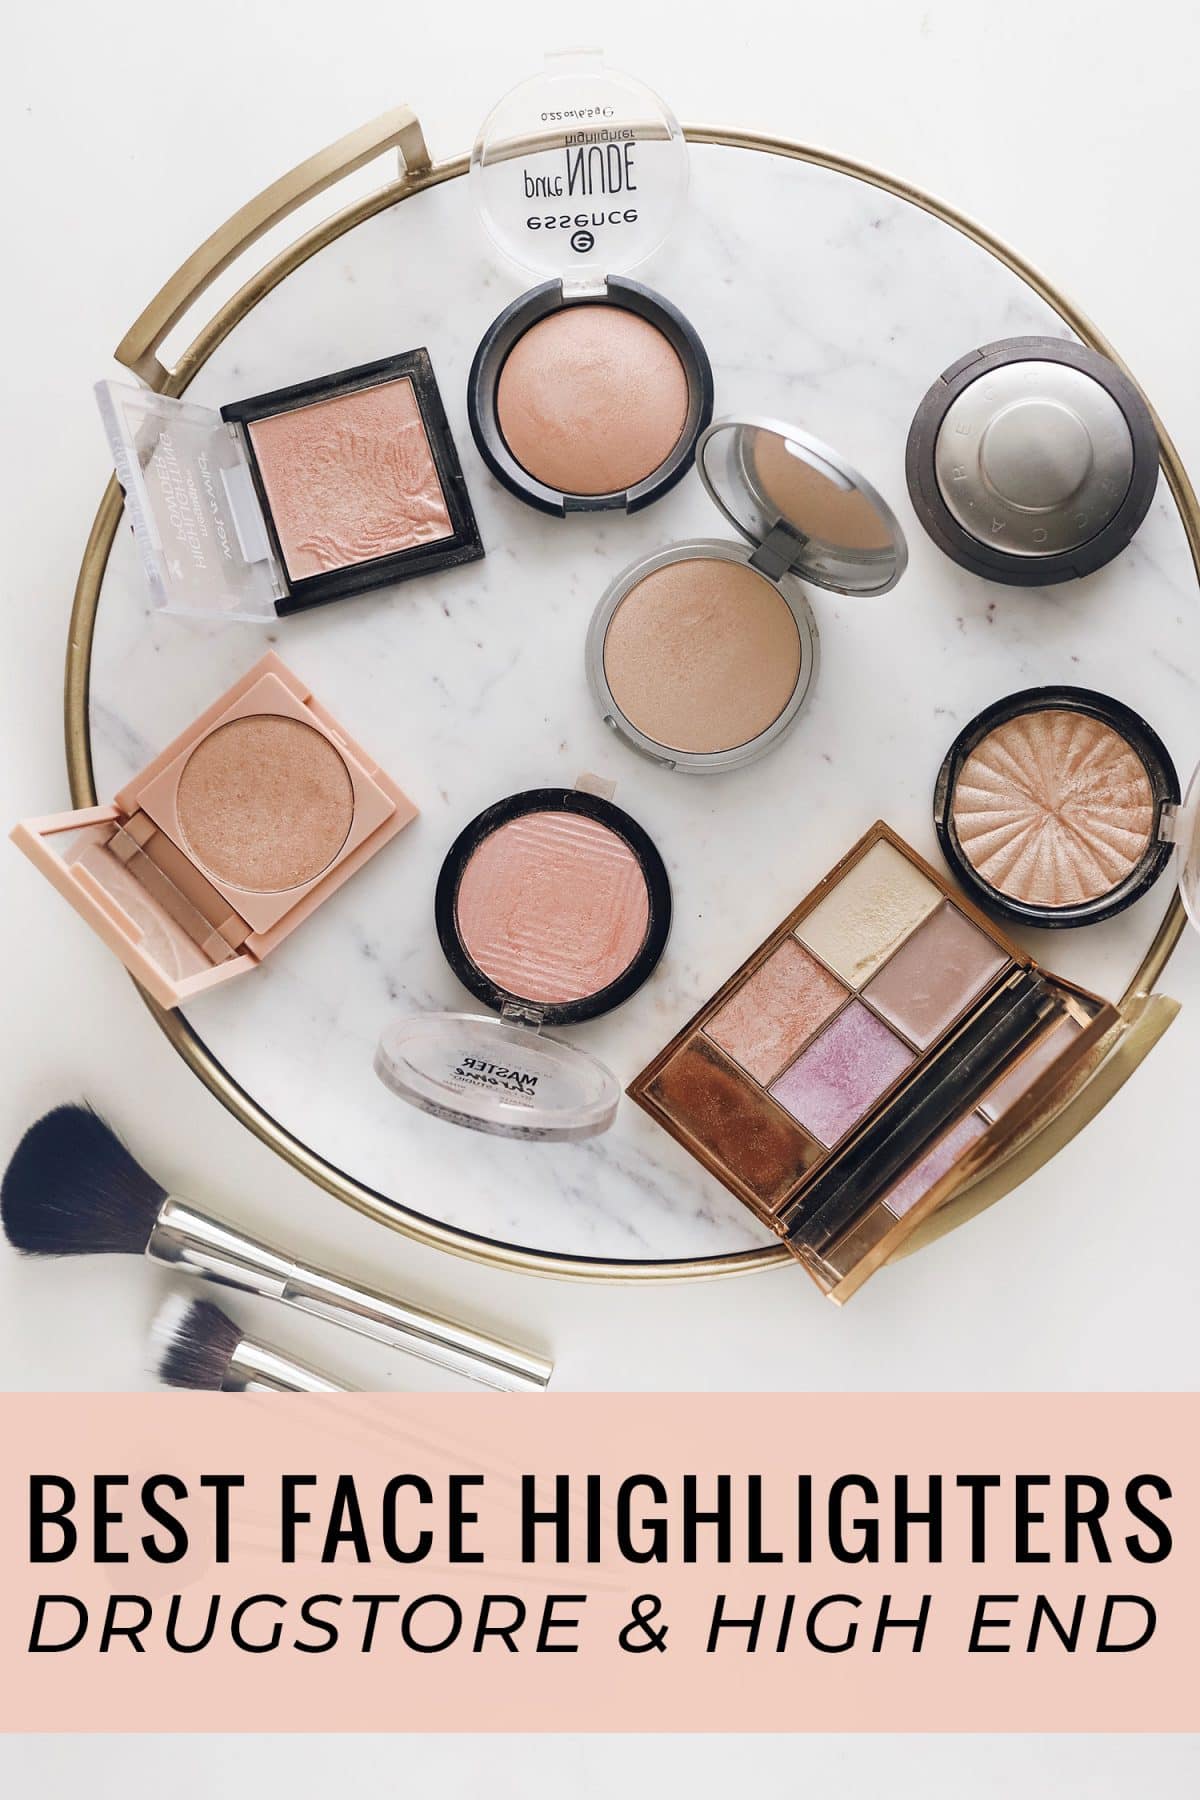 Houston beauty blogger Meg O. on the Go shares the best face highlighter - 5 drugstore and 5 high end options!